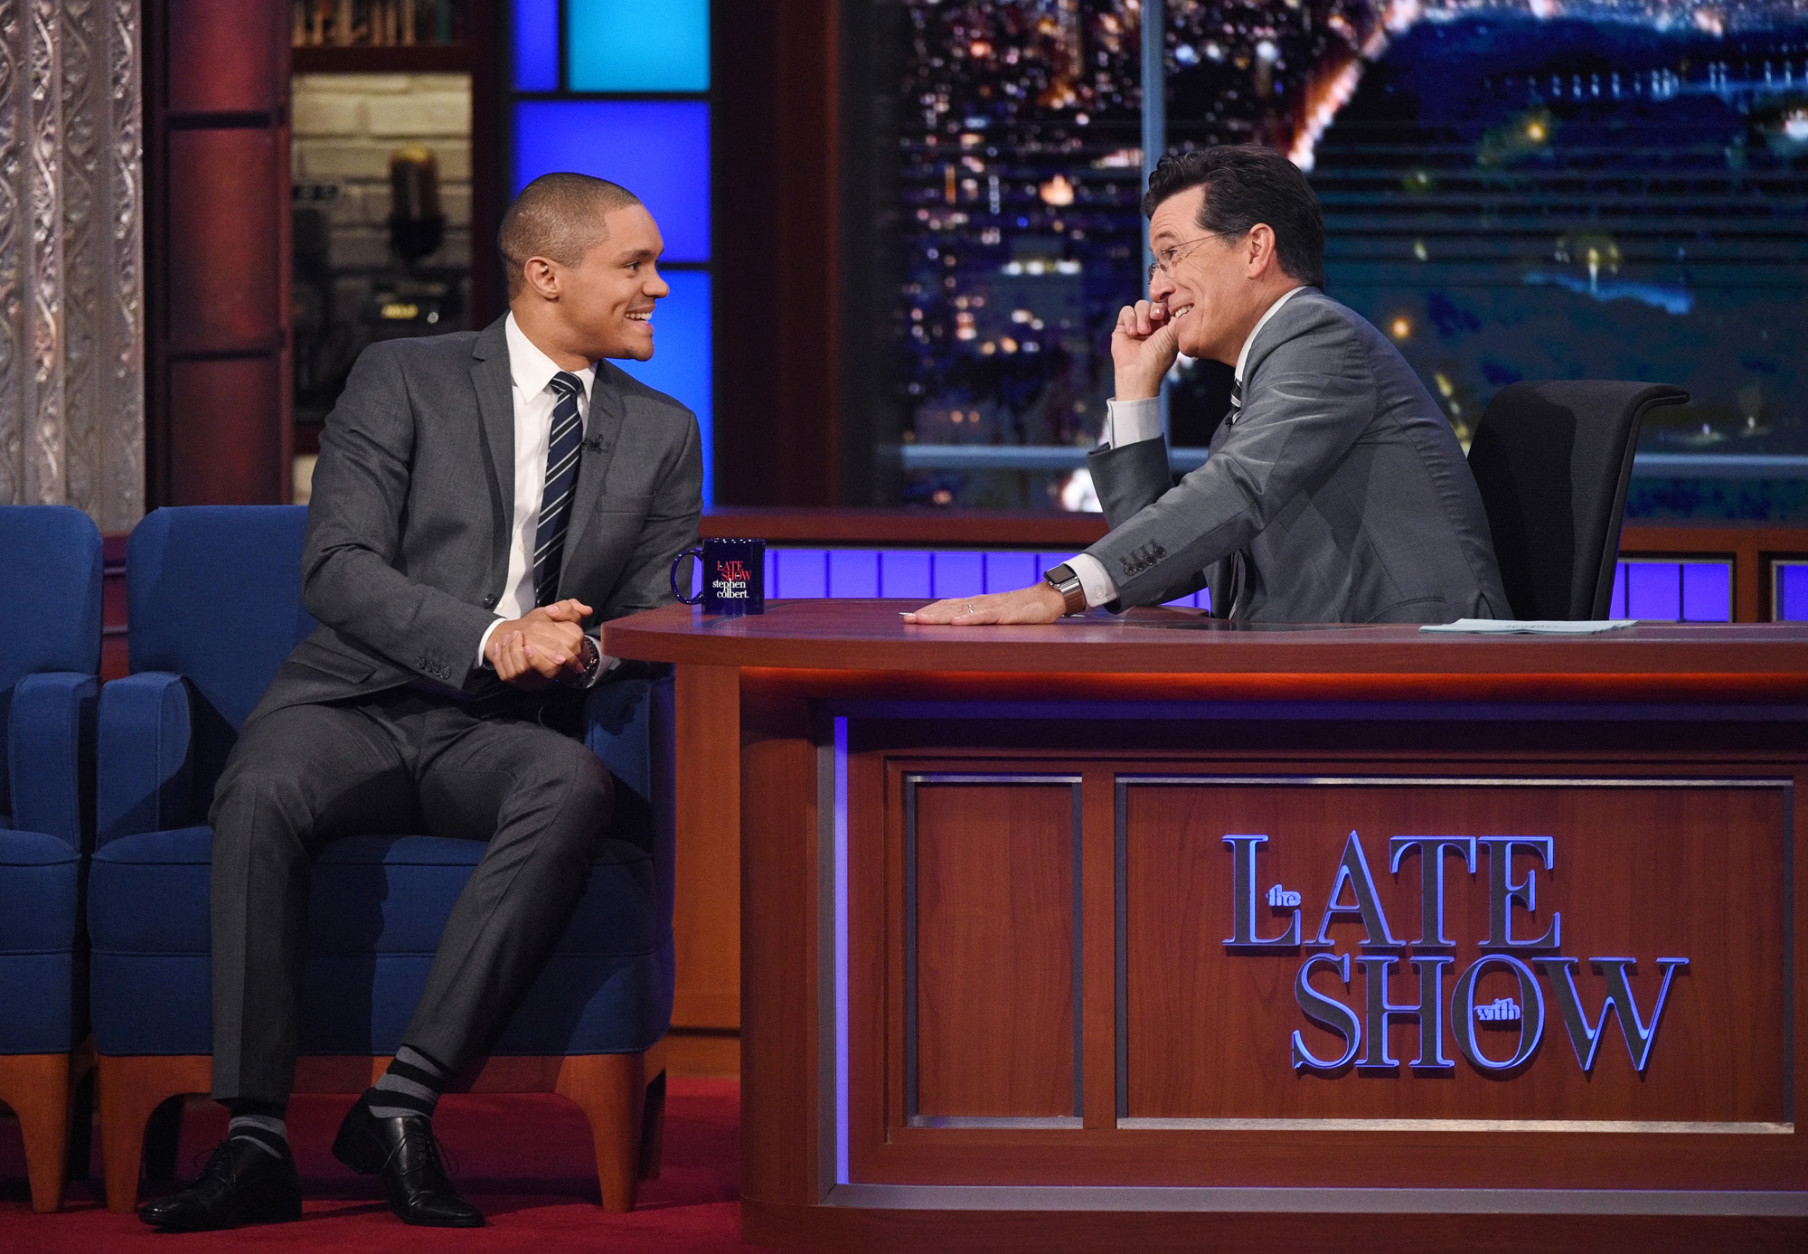 In this image released by CBS, Trevor Noah, left, of the "The Daily Show with Trevor Noah," left, appears with host Stephen Colbert during a taping of "The Late Show with Stephen Colbert," Thursday Sept. 17, 2015, in New York. (Jeffrey R. Staab/CBS via AP) MANDATORY CREDIT; NO ARCHIVE; NO SALES; FOR NORTH AMERICAN USE ONLY.